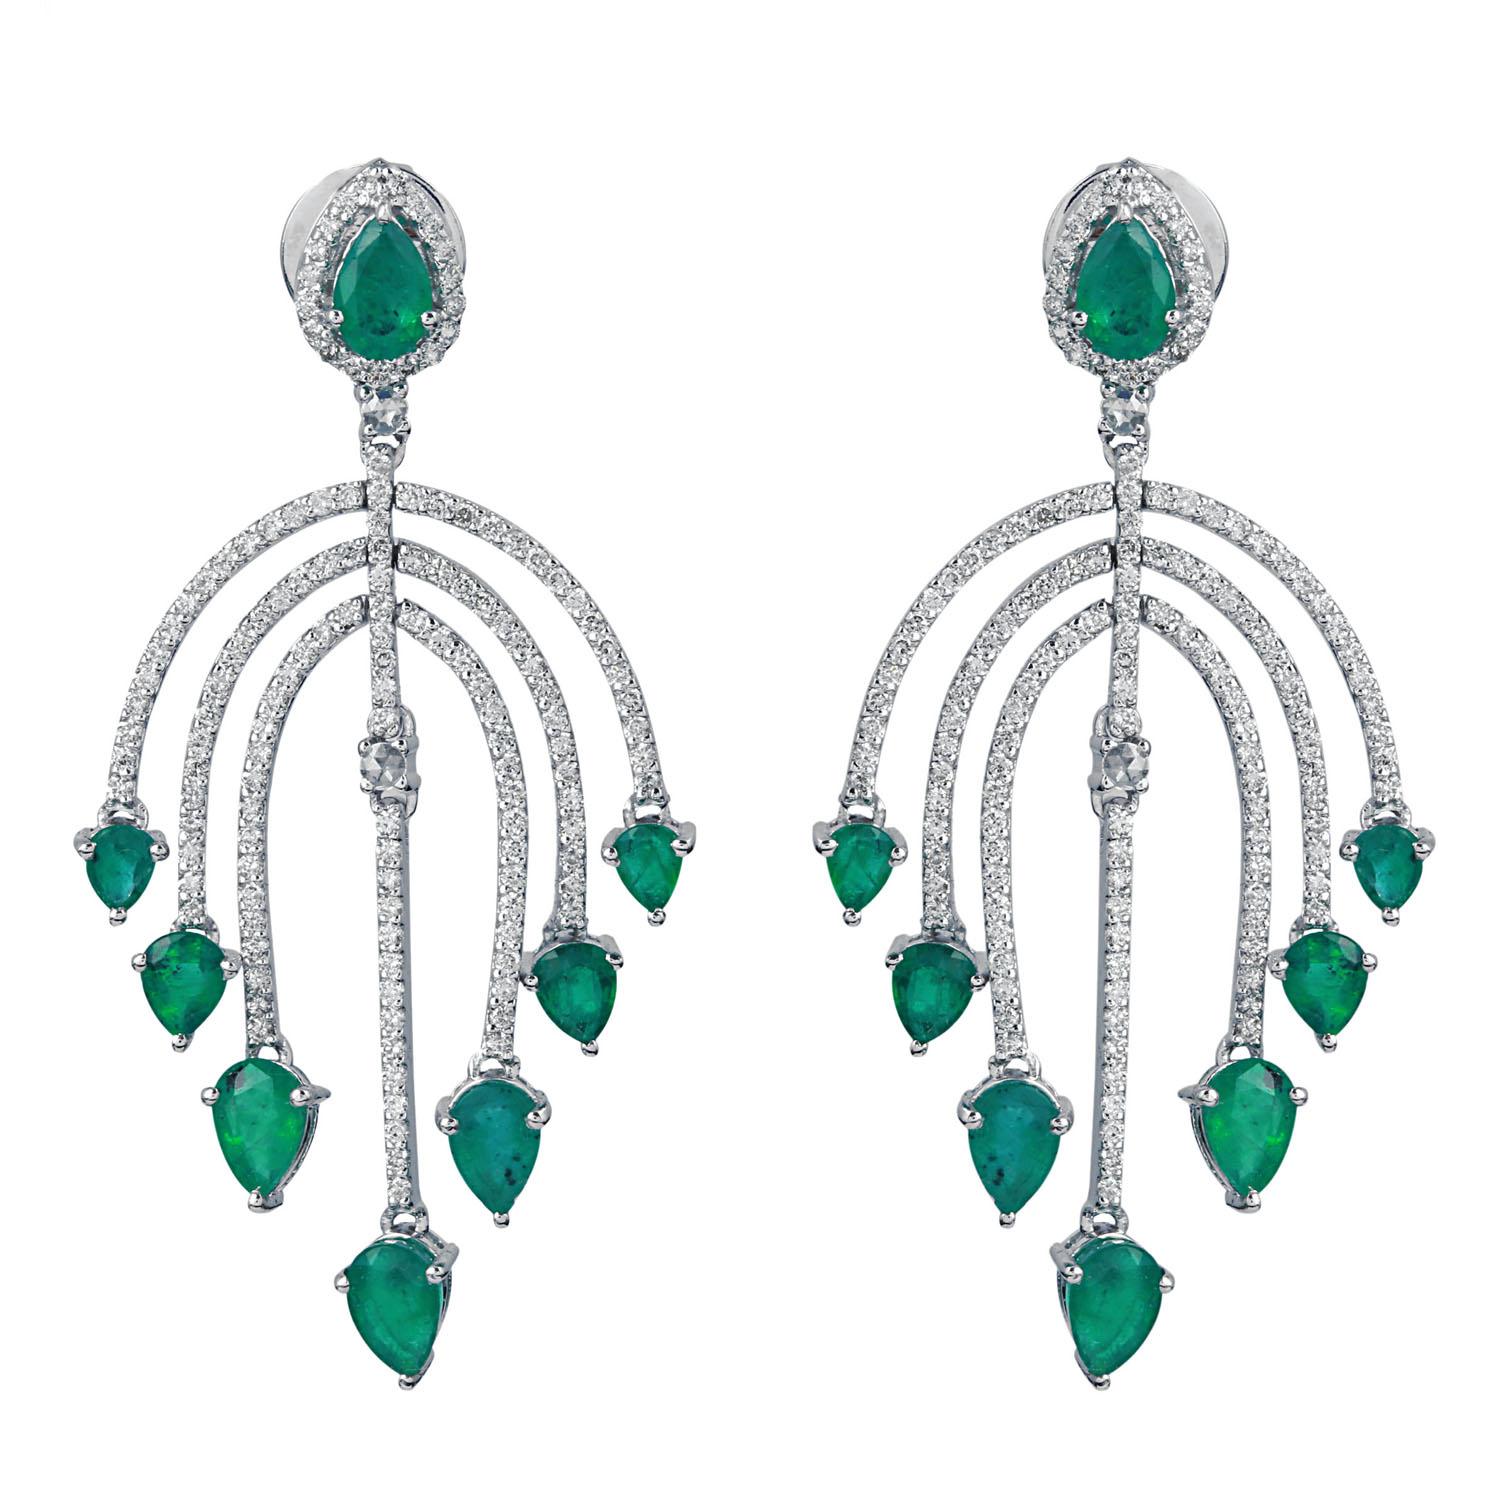 Extremely Beautiful These18K White Gold Emerald Gemstone Dangle Chandelier Earrings set with Brilliant Cut Diamonds will make her feel special all day long

Specifications

Dimensions: Length: 4.5 cm, Width: 2.5 cm
Gross Weight: 16.030 gms
Gold